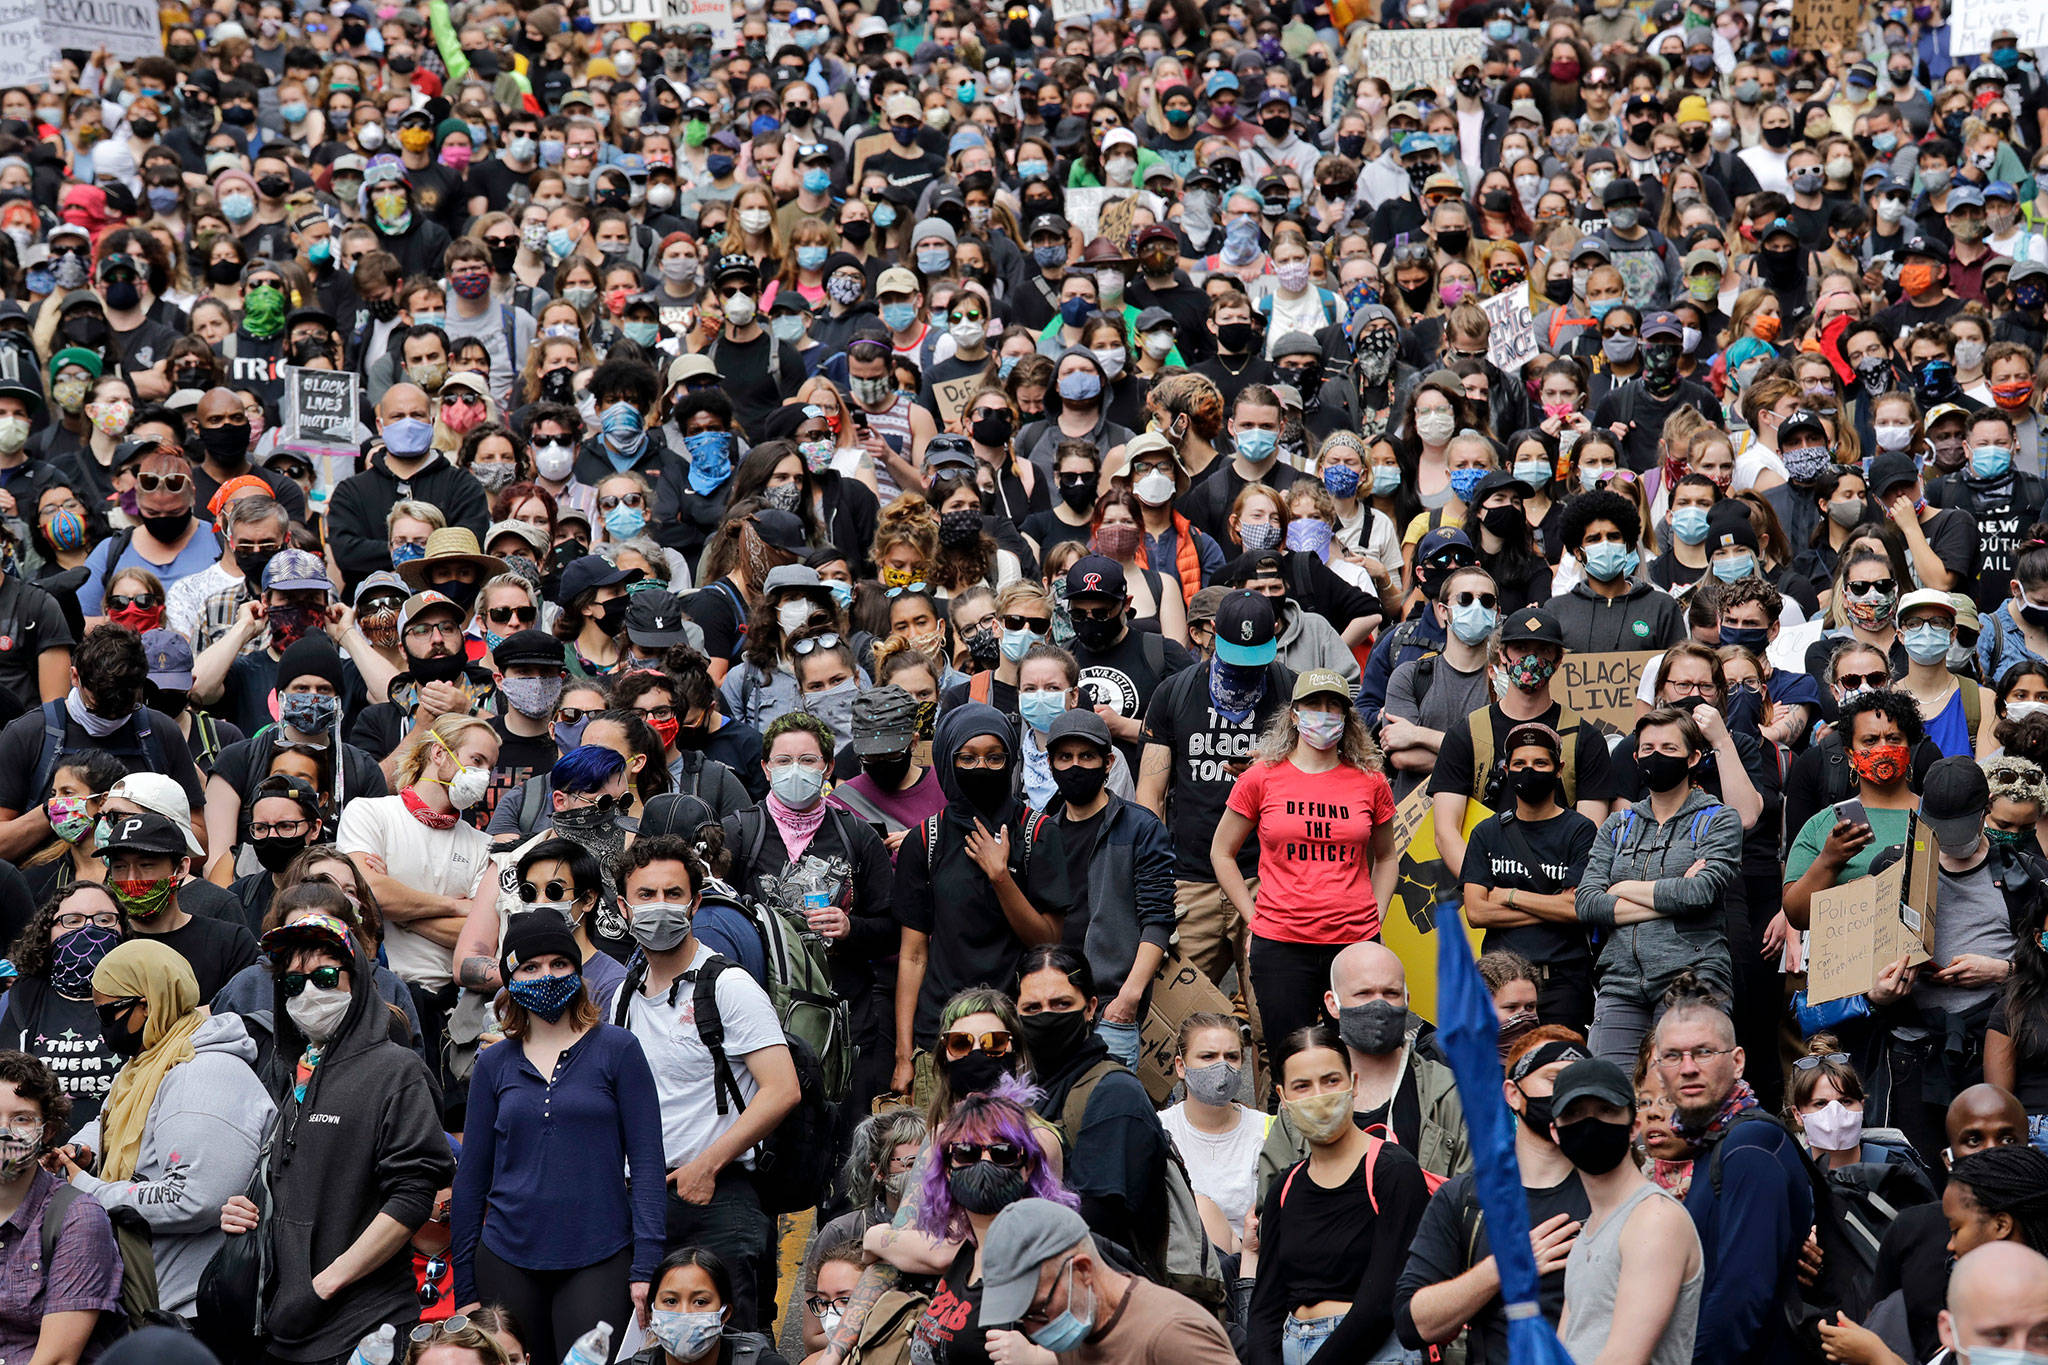 Peaceful protesters fill a street adjacent to Seattle City Hall on Wednesday, June 3, 2020, in Seattle, following protests over the death of George Floyd, a black man who was in police custody in Minneapolis. (Elaine Thompson/Associated Press)